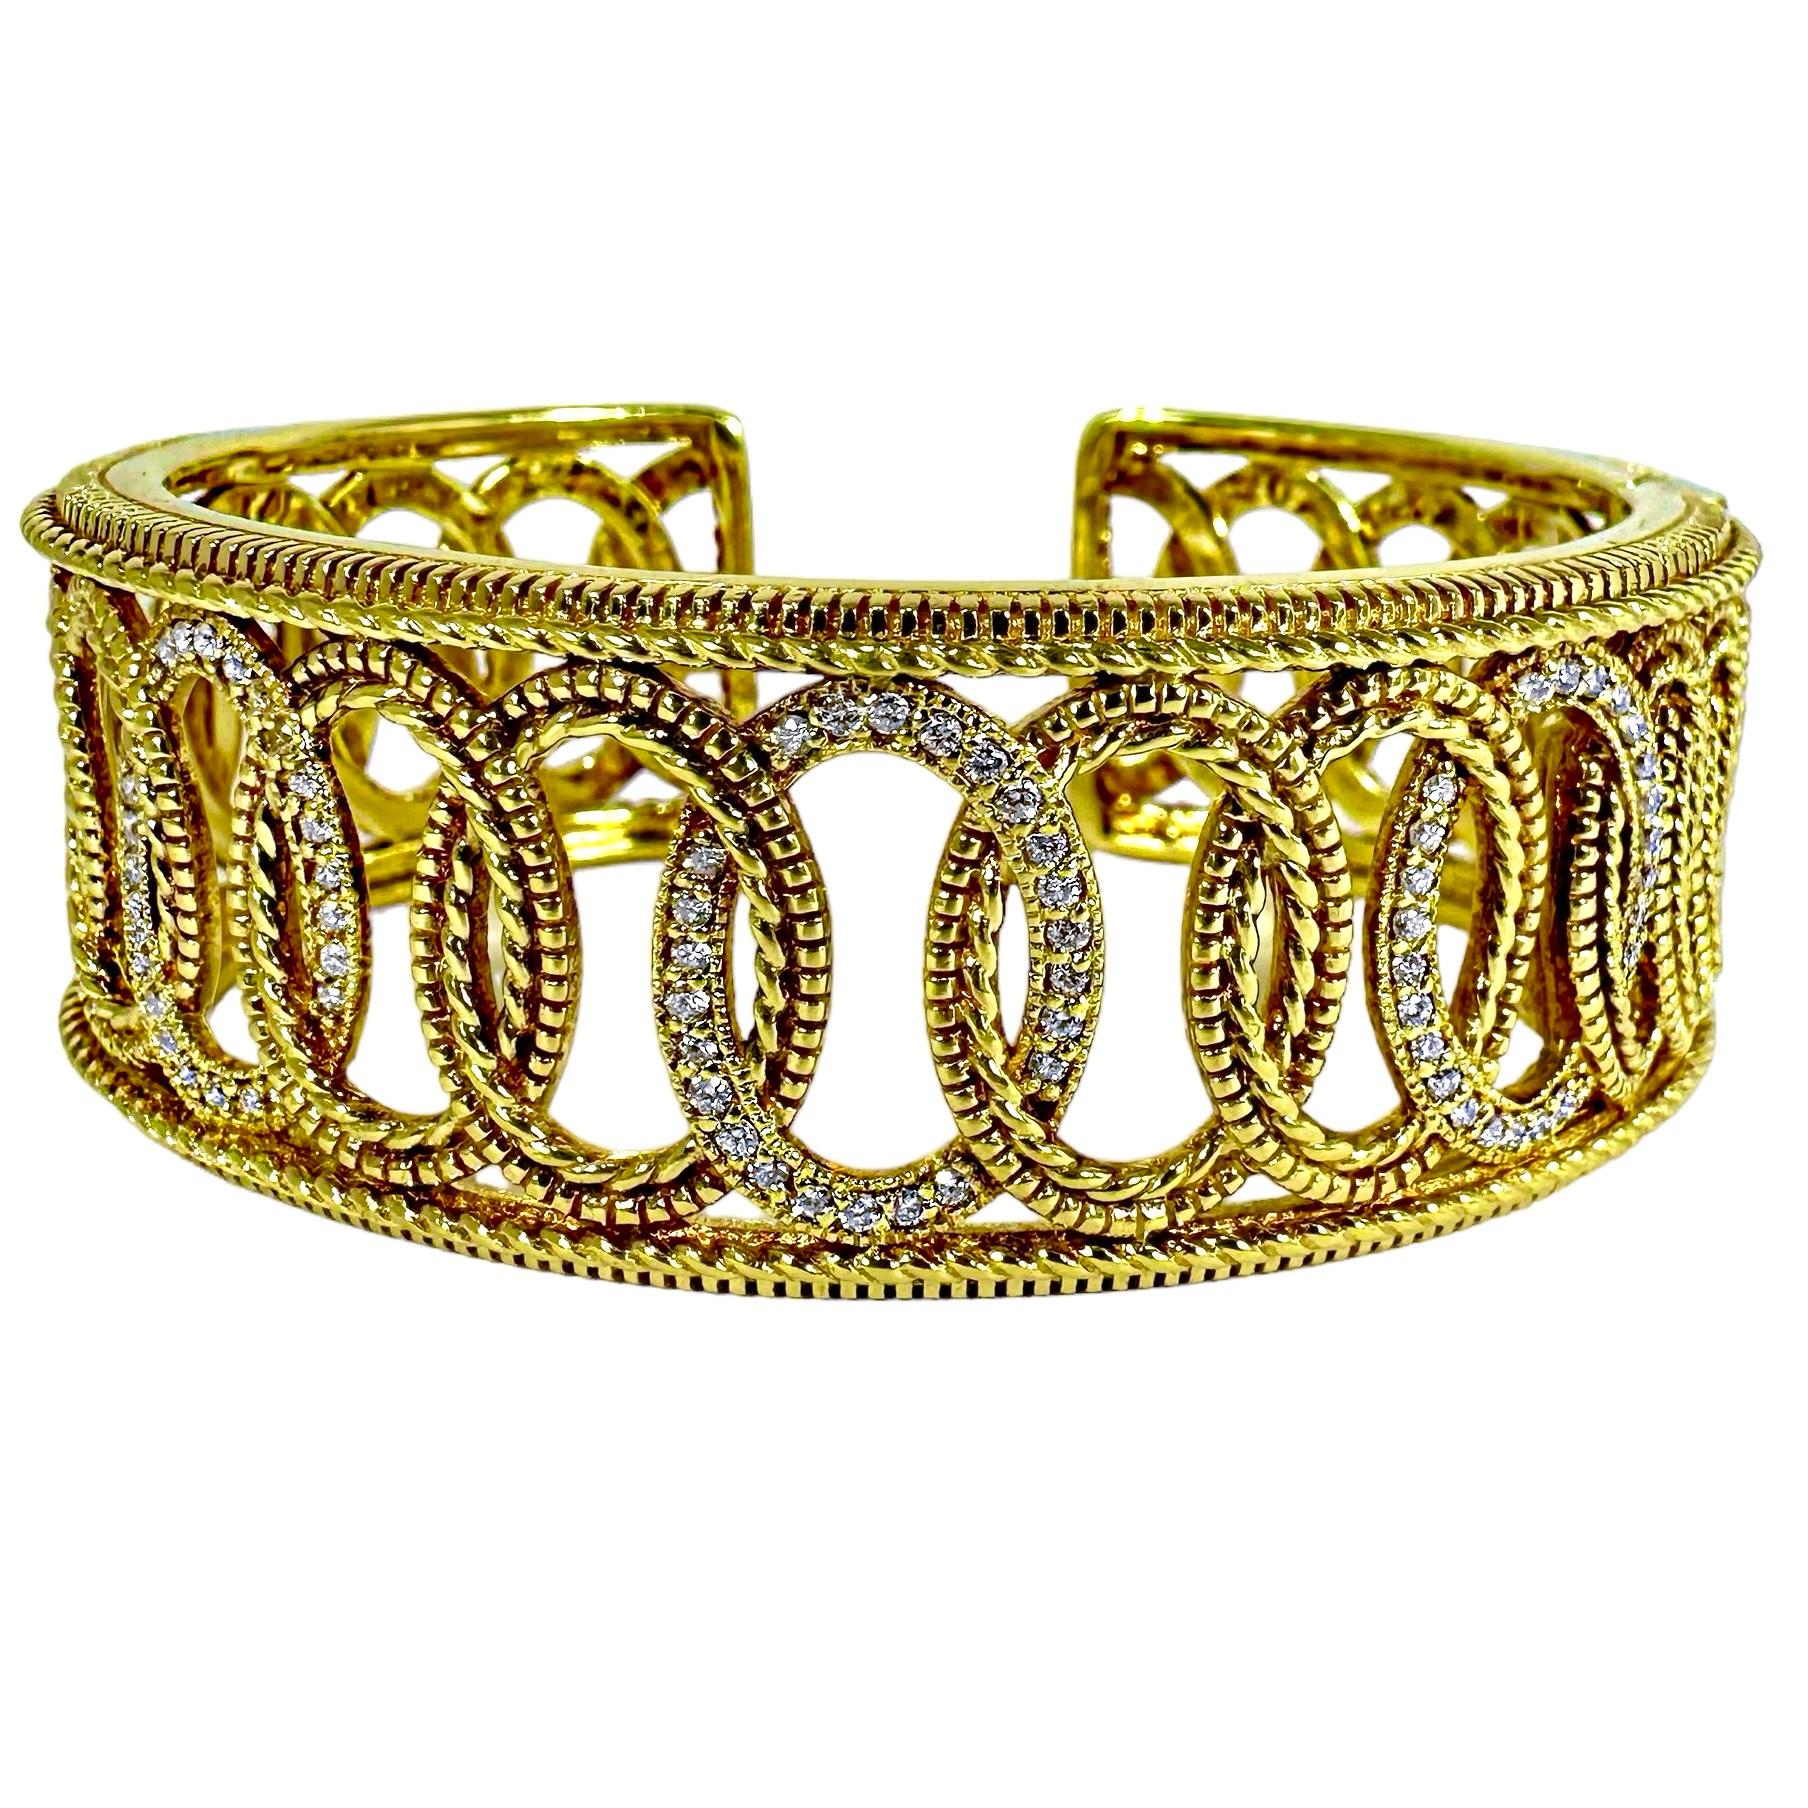 This wonderful Judith Ripka designer creation, created expertly from 18k yellow gold, is the personification of casual elegance. One continuous line of rope edged intertwined, oval motifs are flanked by edges that are in twisted rope and castellated